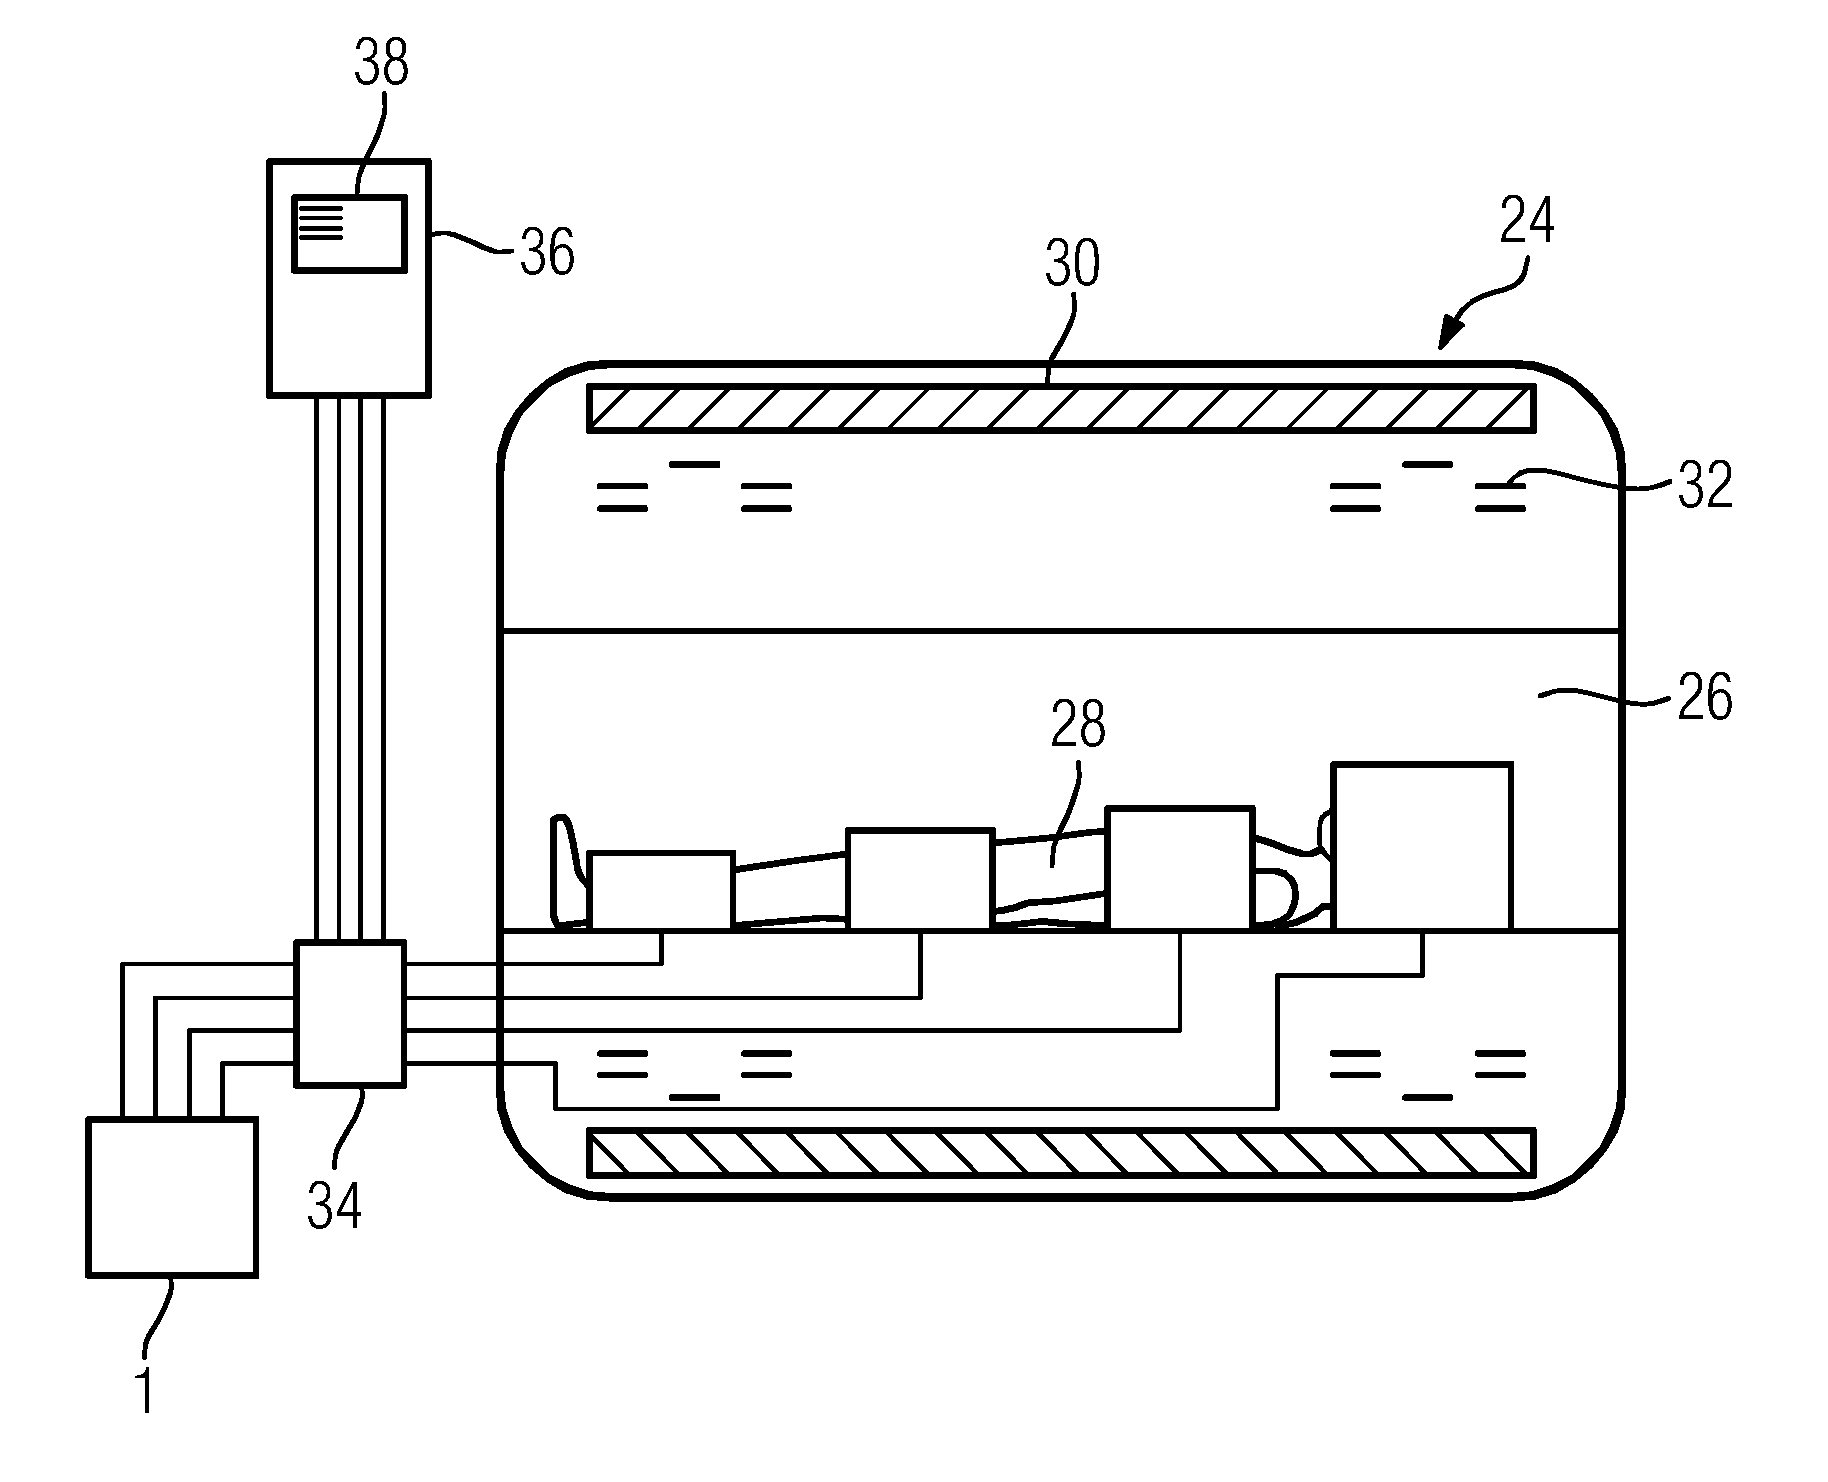 Transmitting Unit for a Magnetic Resonance Imaging System